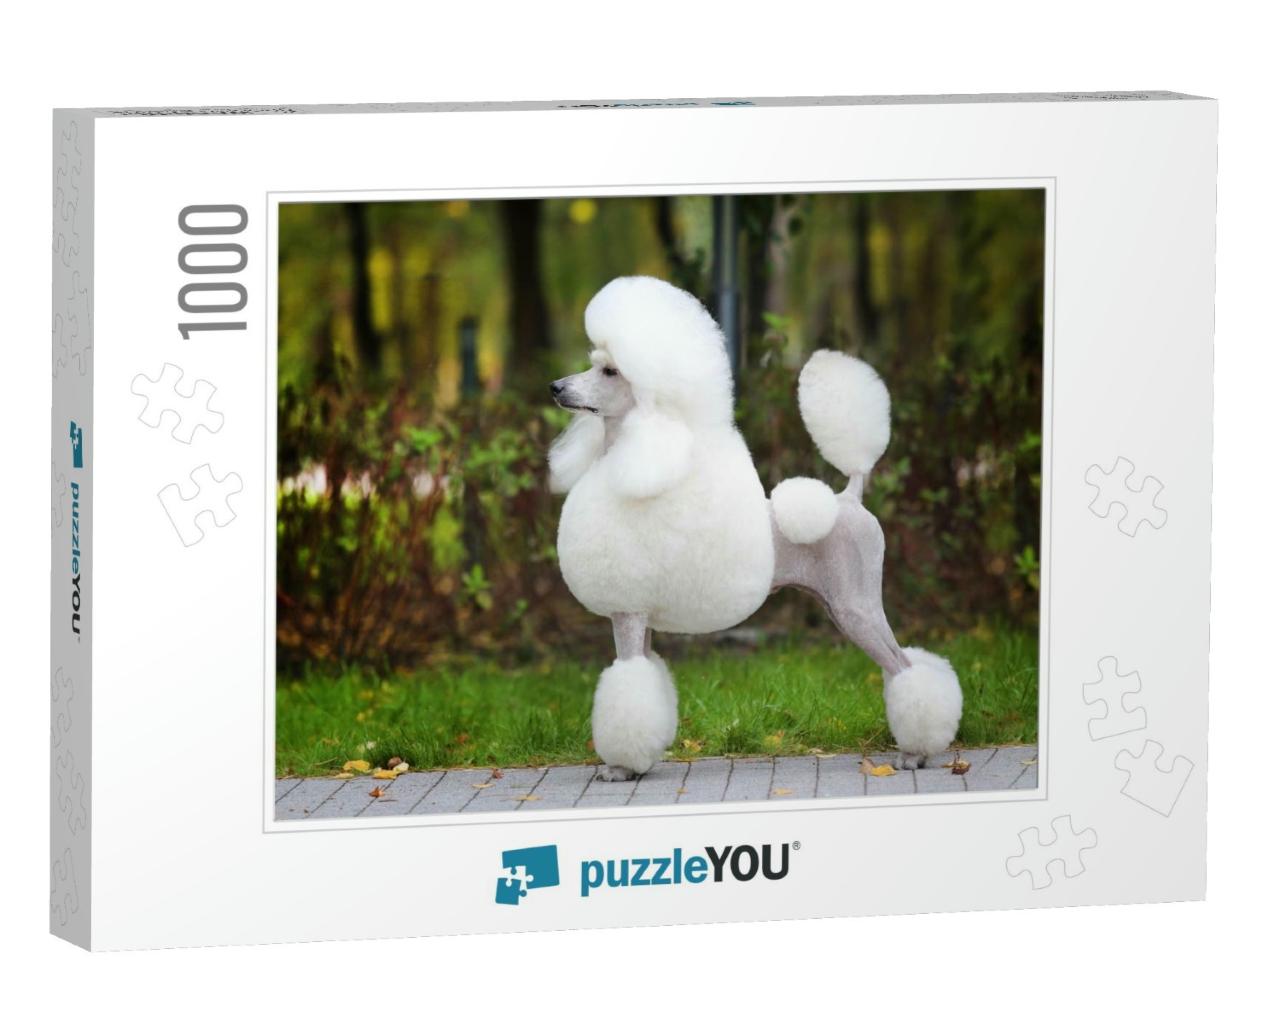 Big White Poodle Stands on the Path in the Park. Exterior... Jigsaw Puzzle with 1000 pieces